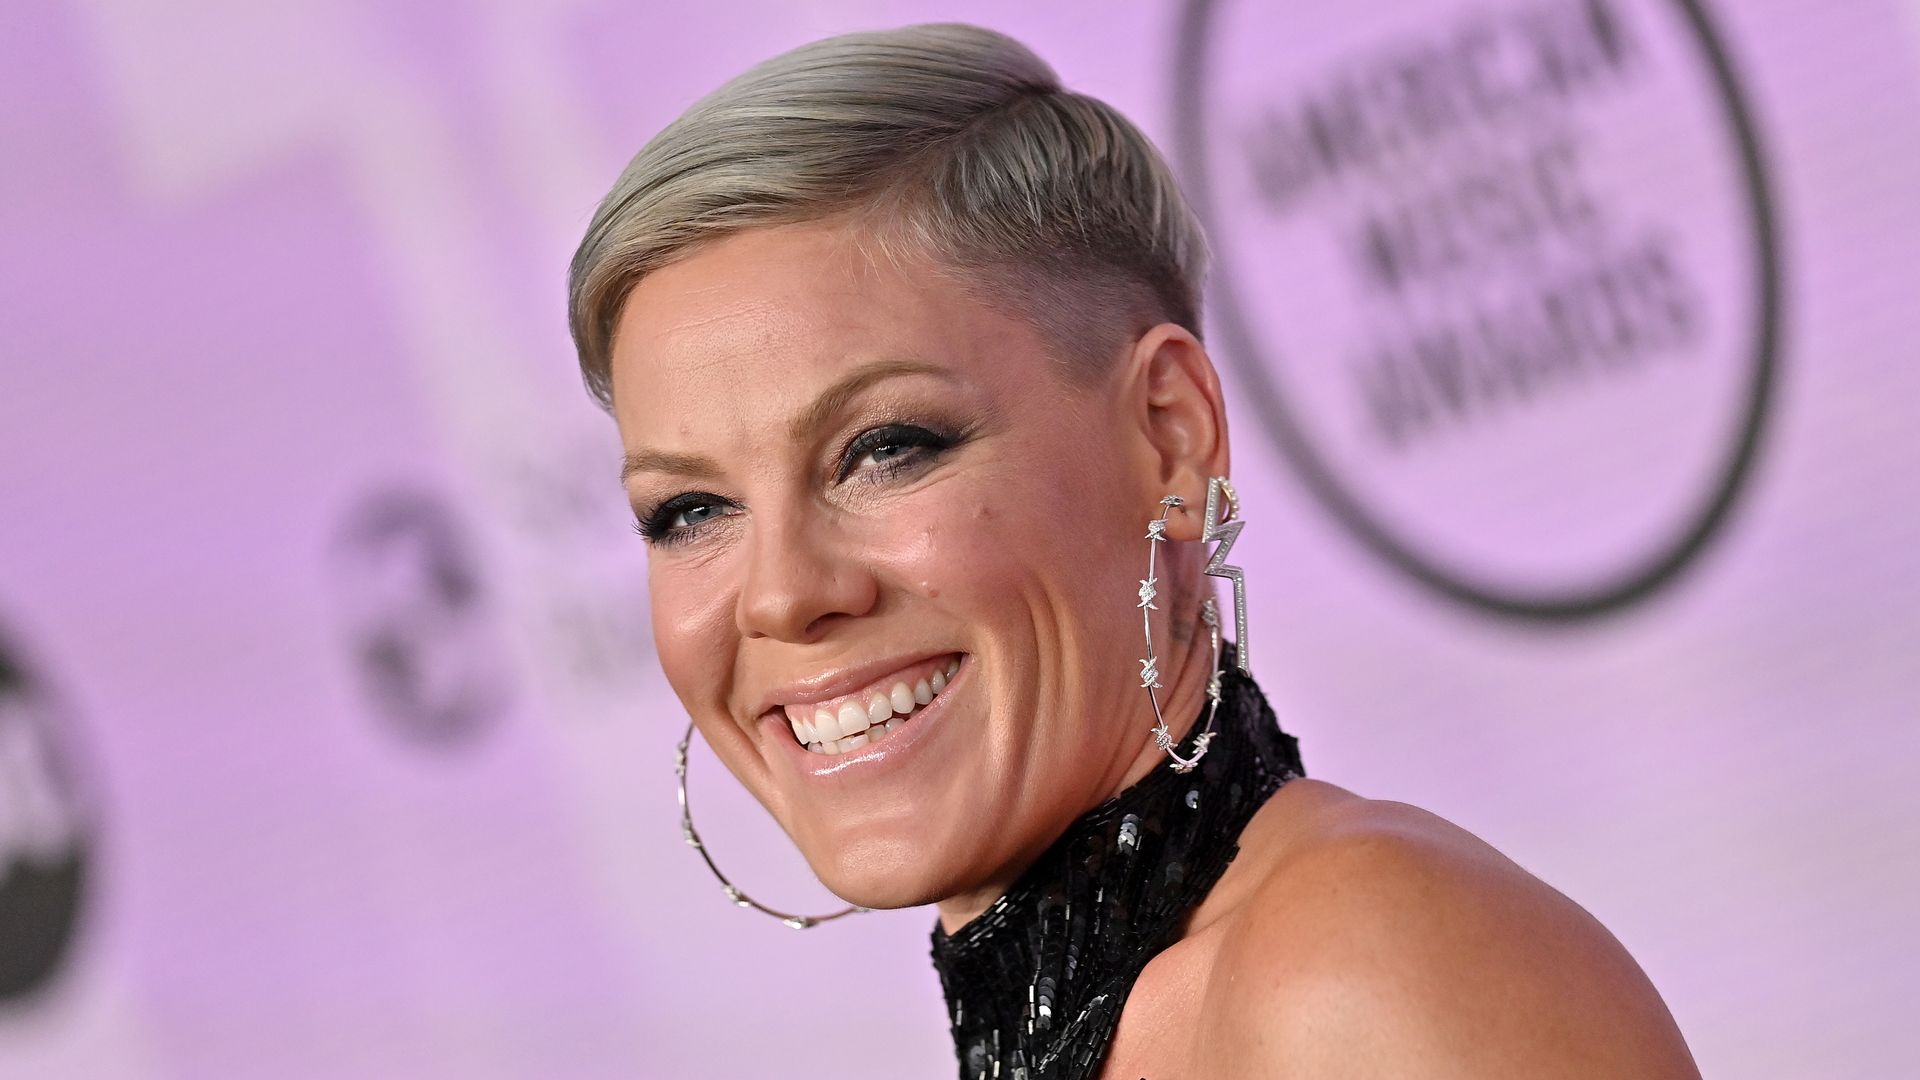 Pink: Latest News, Pictures & Videos - HELLO!